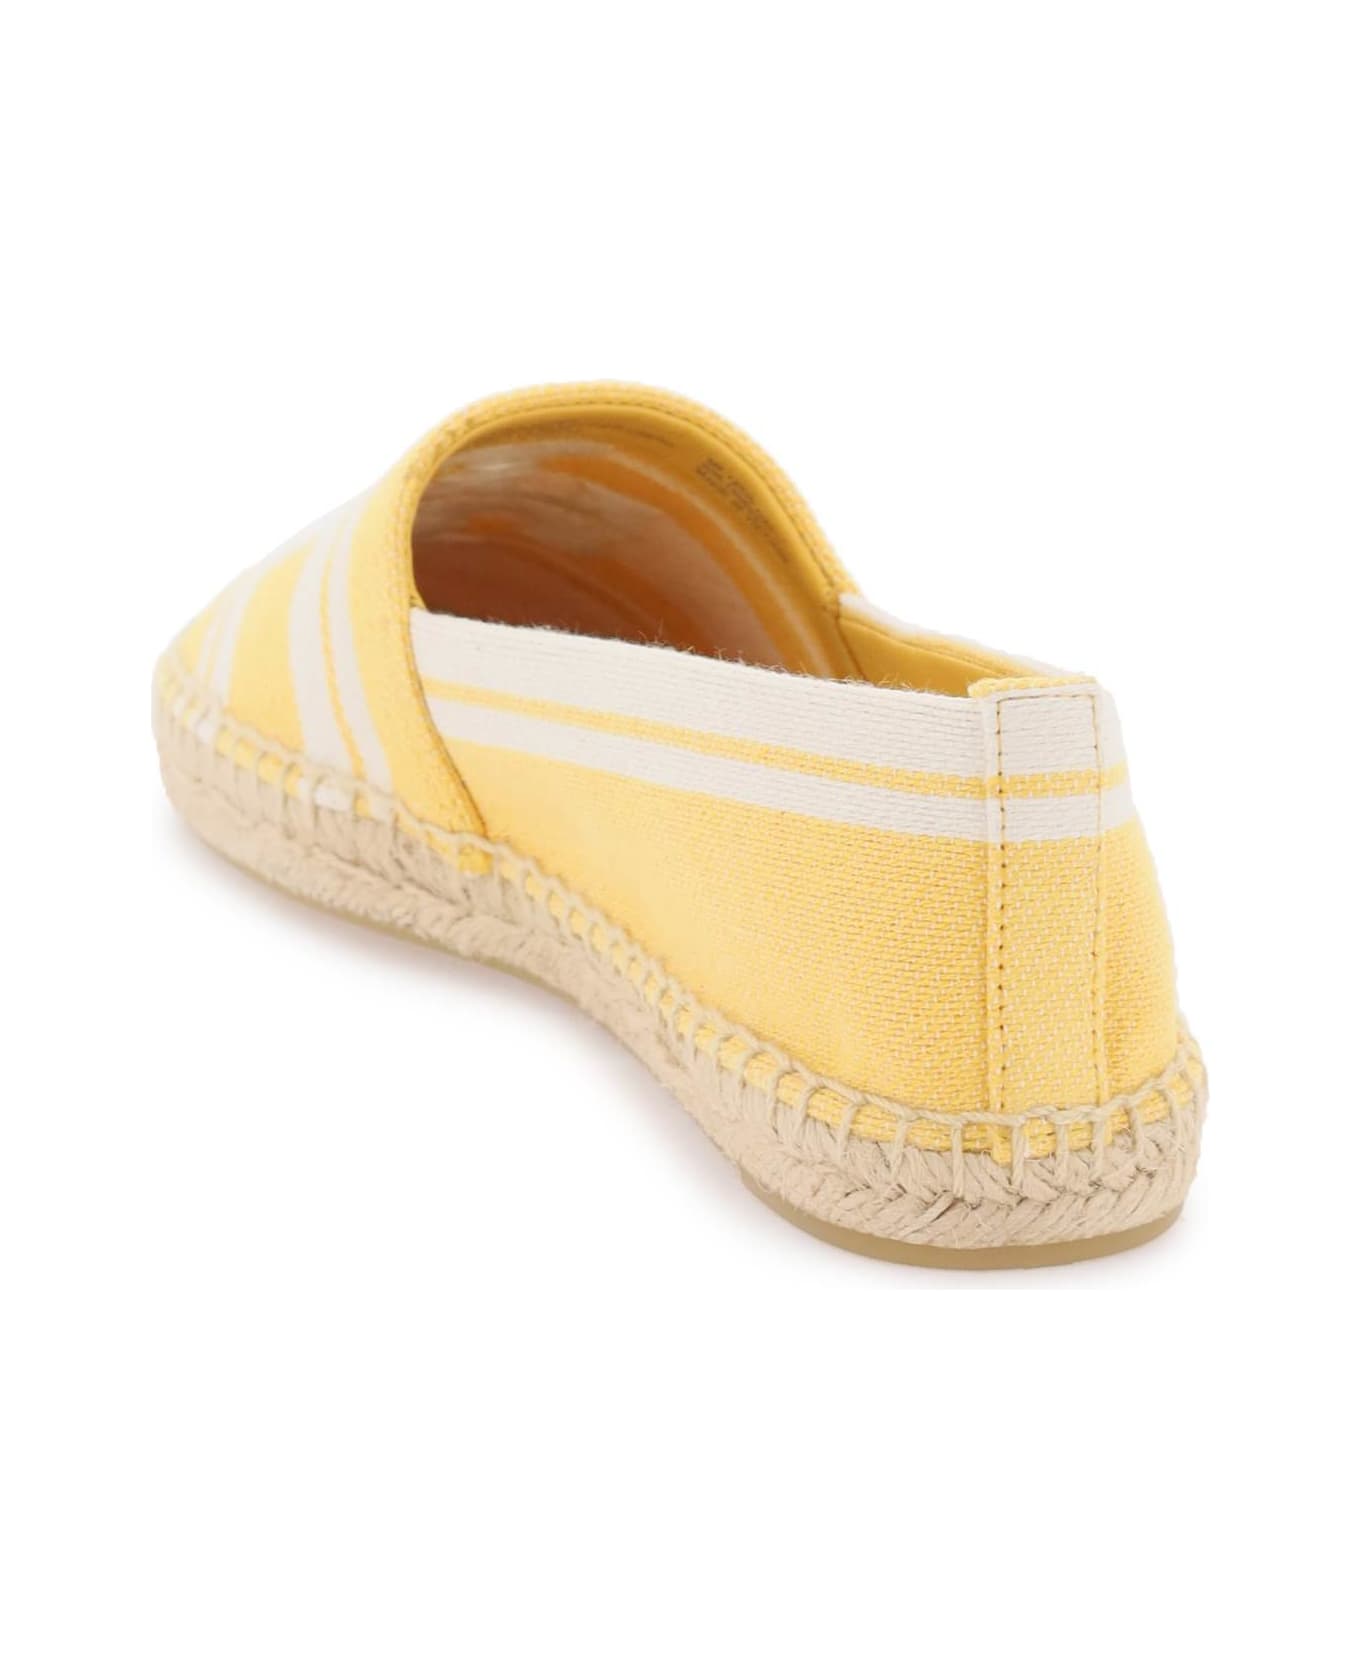 Tory Burch Striped Espadrilles With Double T - MELLOW YELLOW ASH WHITE (Yellow)